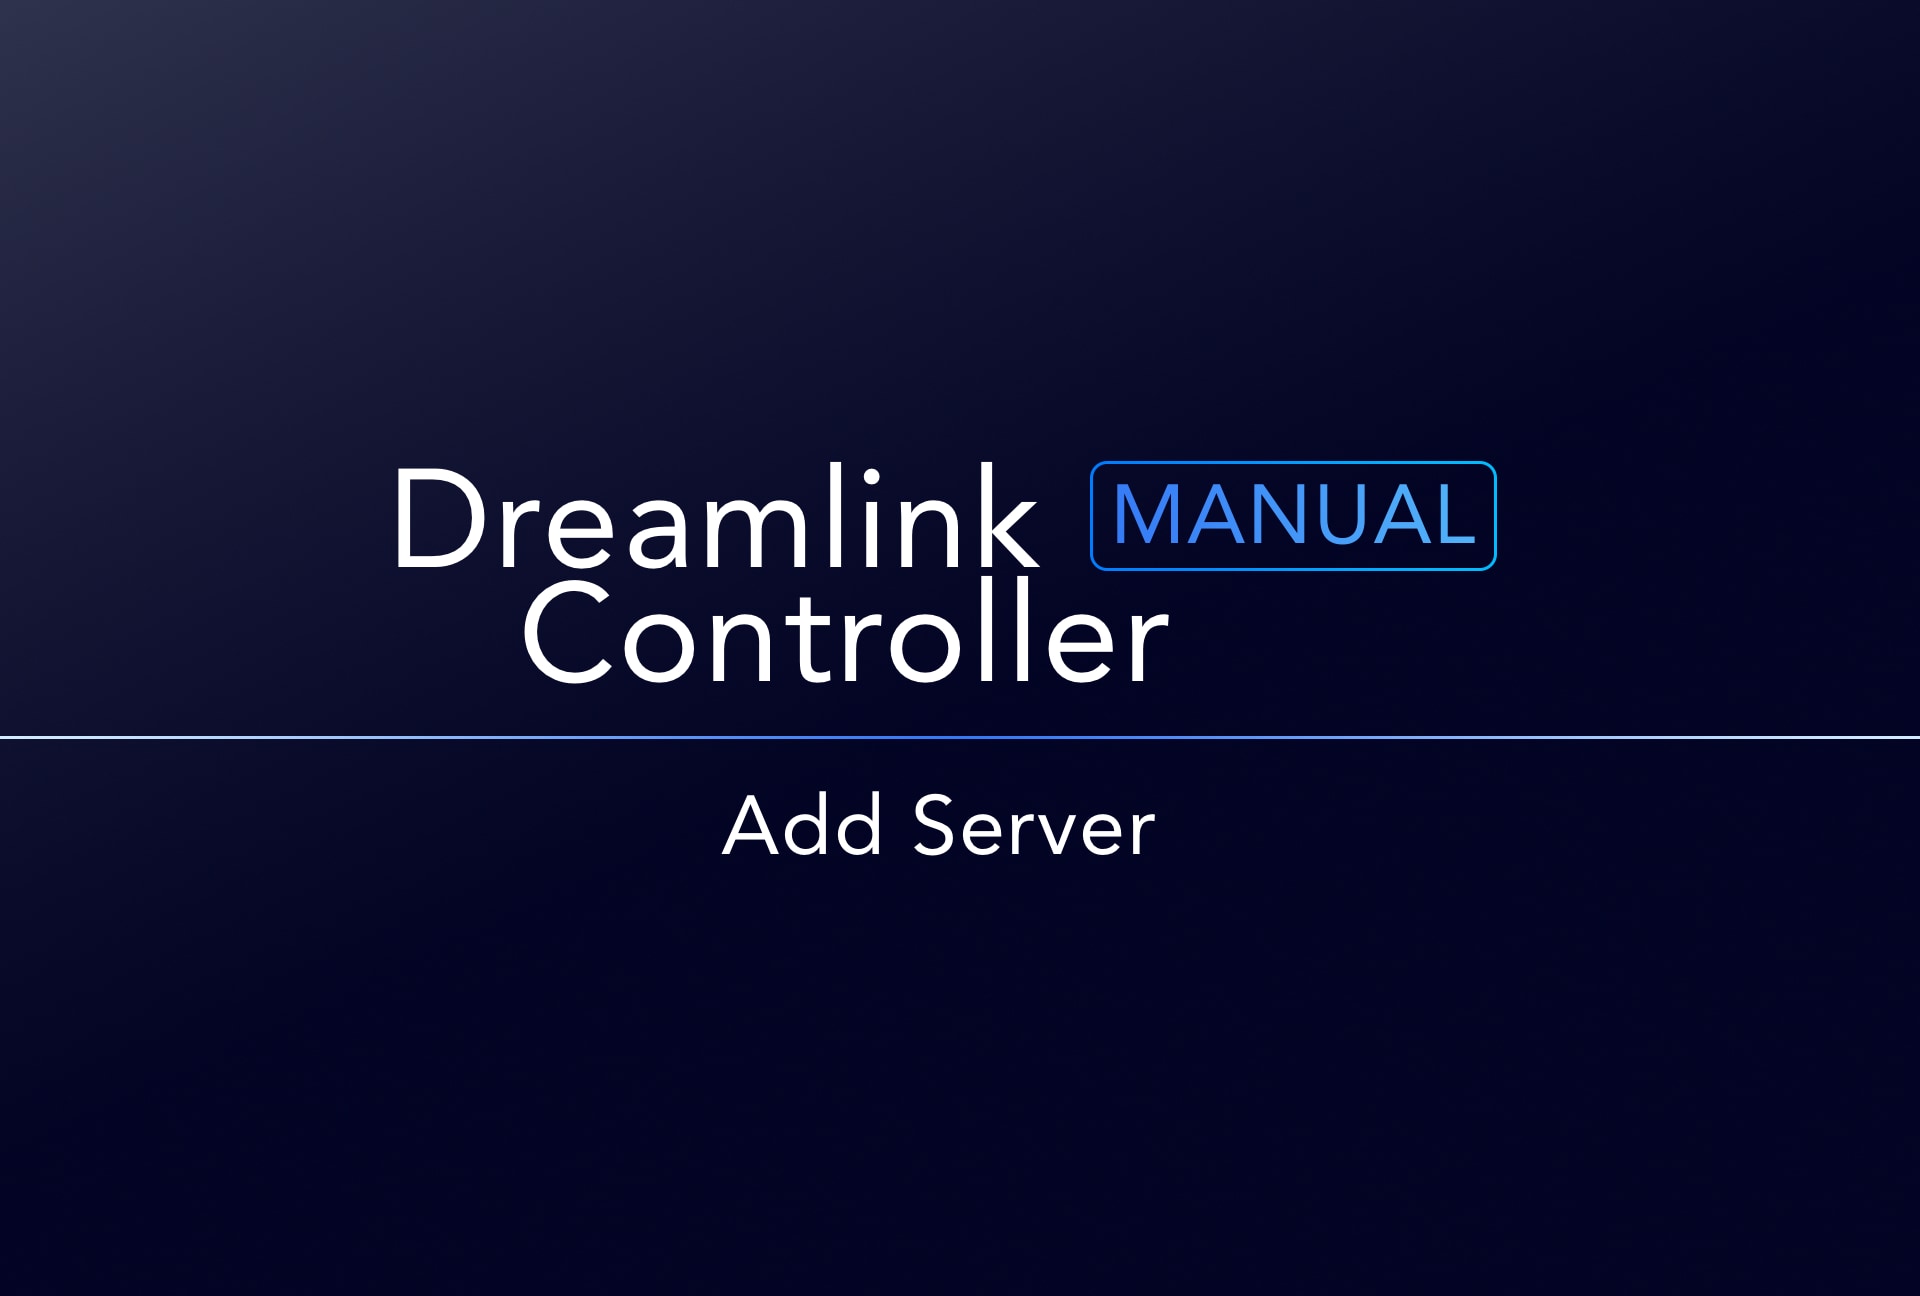 picture for ADD SERVER ON DREAMLINK CONTROLLER